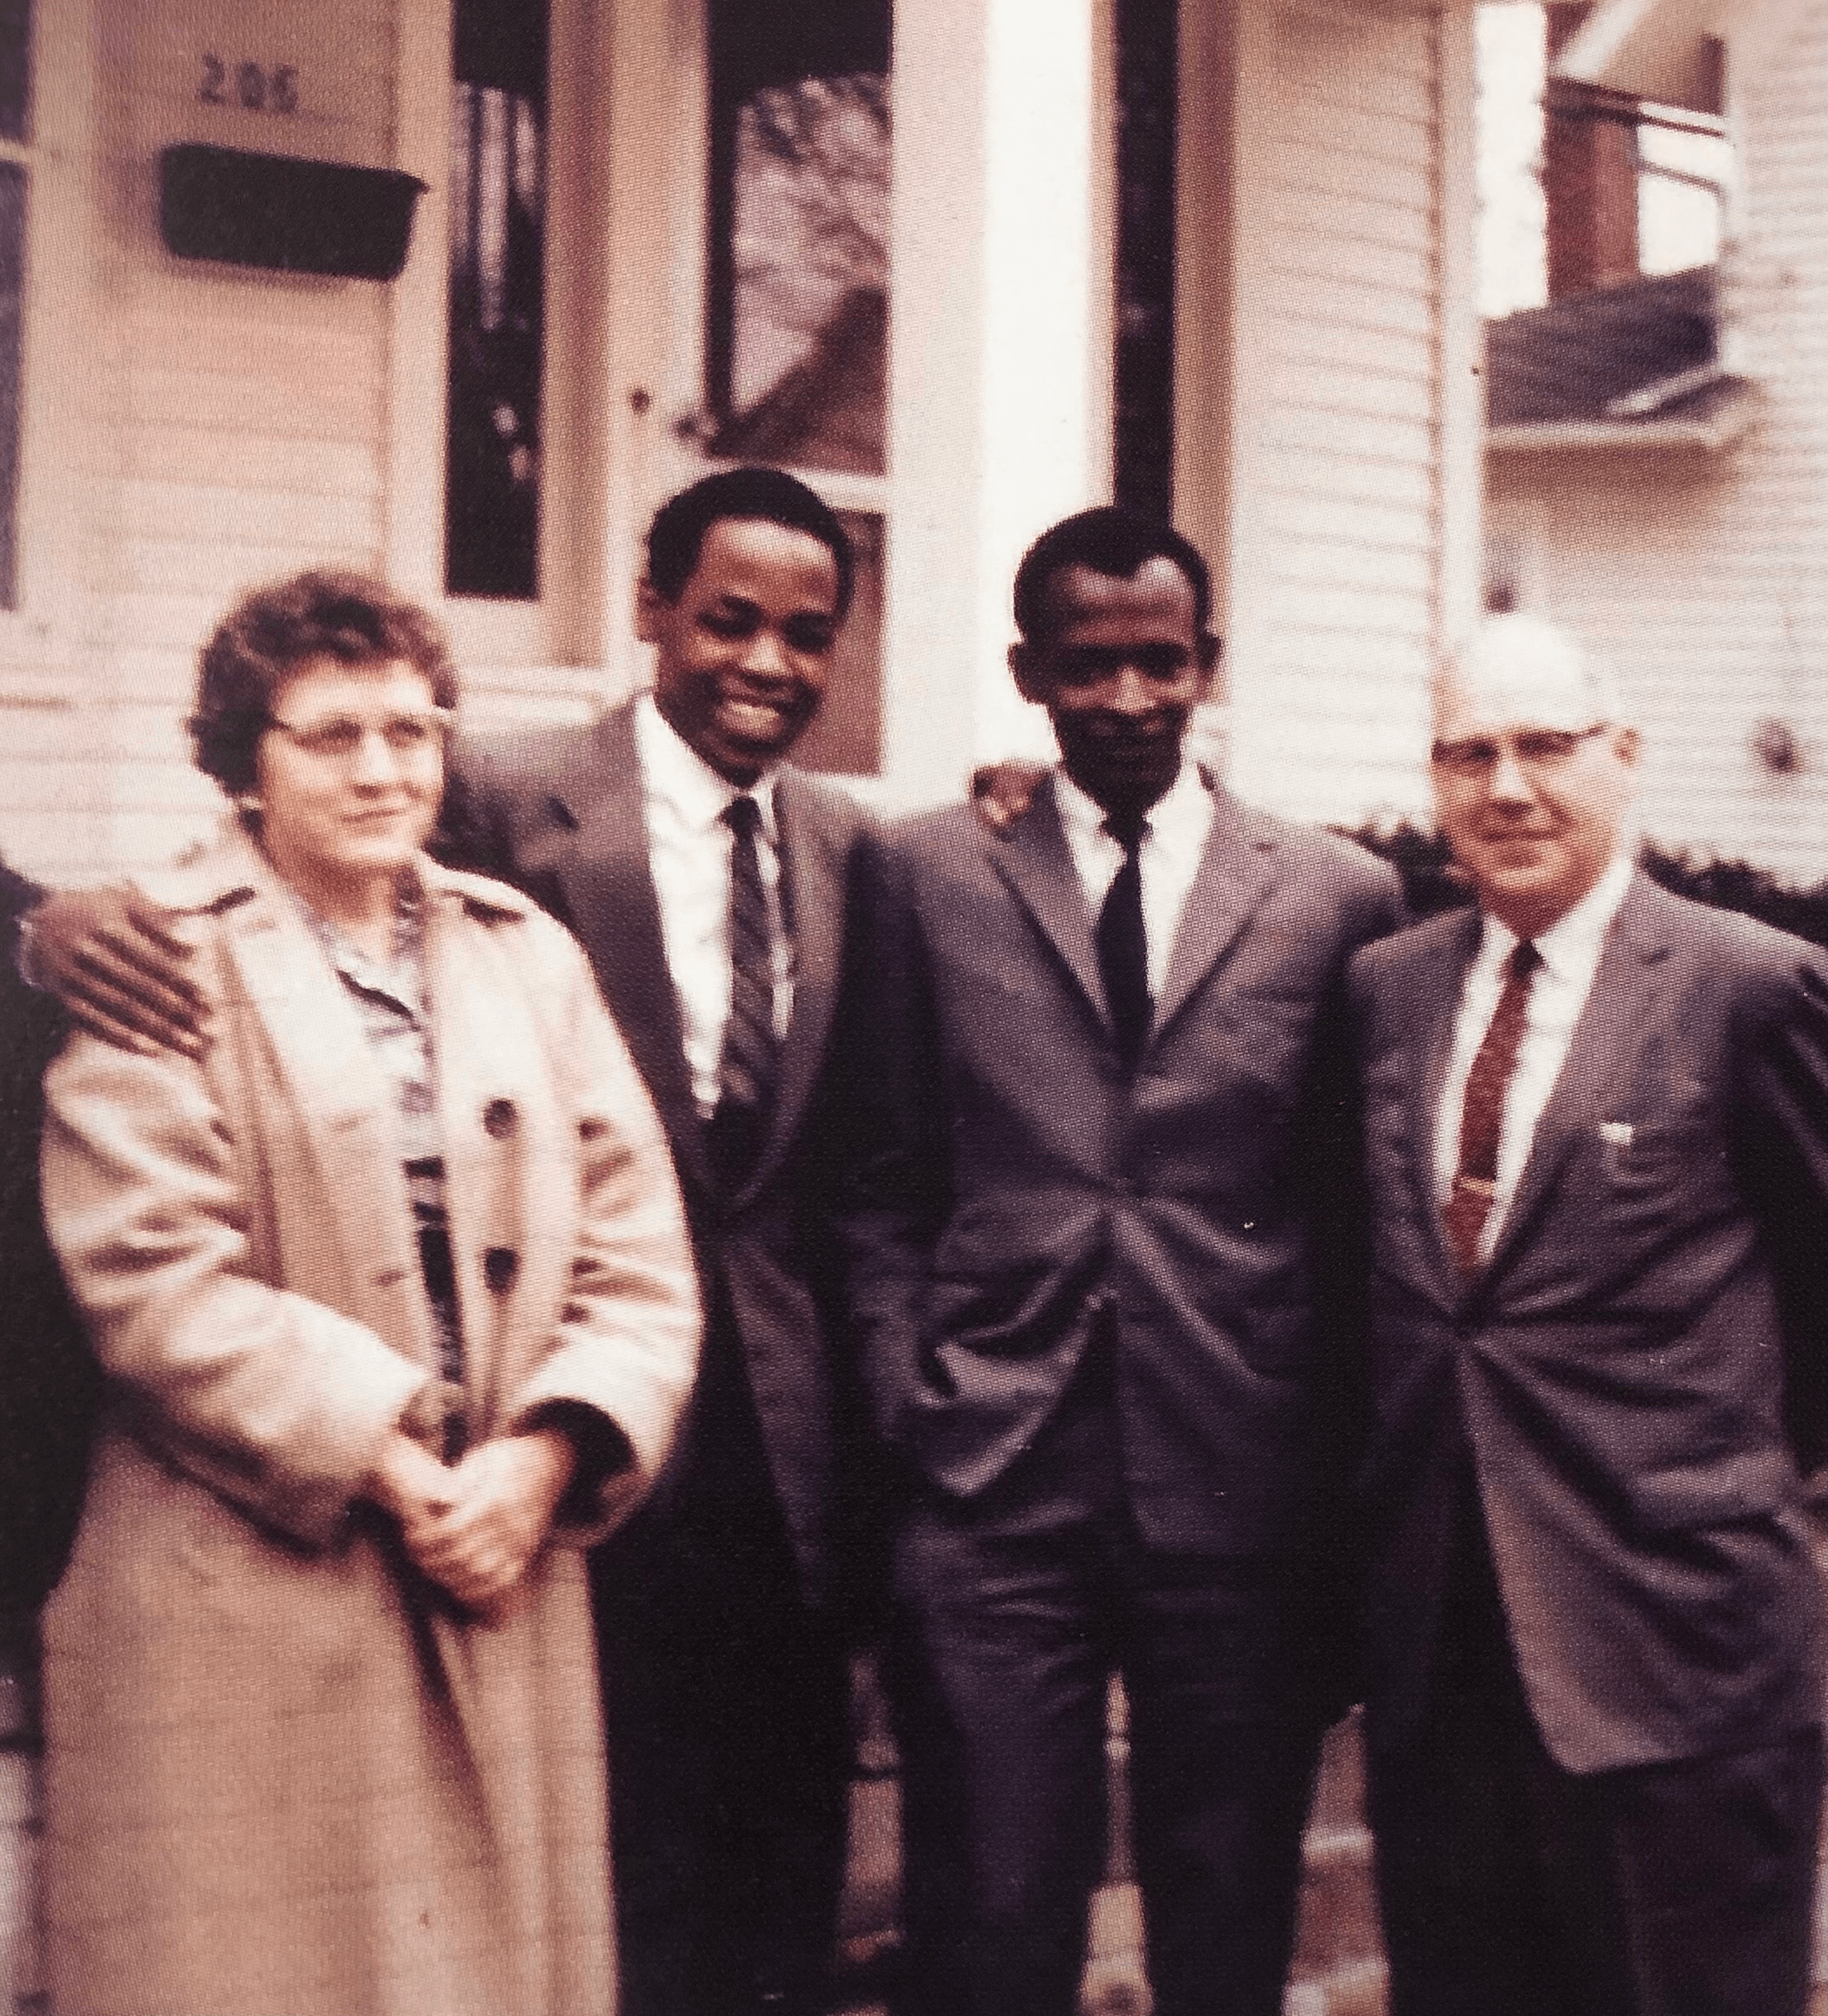 Dorothy Hamilton, James Karugu, an unknown man, and Dr. Ernest Hamilton stand outside a house in the early 1960s in Bowling Green.